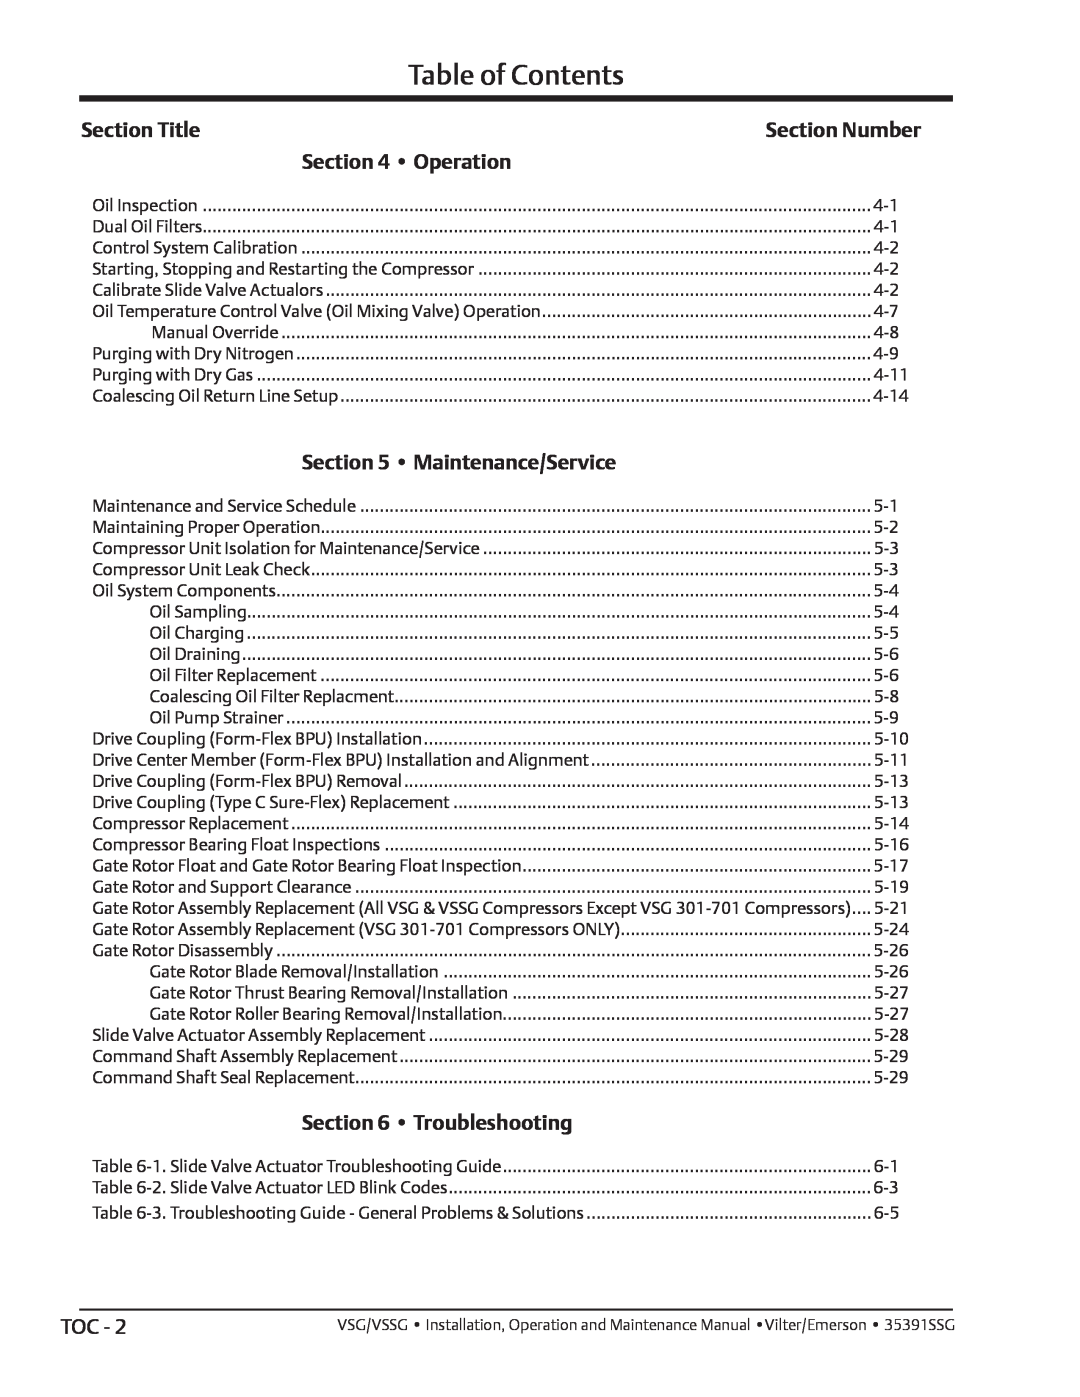 Emerson VSSG, VSG manual Section Number, Operation, Maintenance/Service, Troubleshooting, Table of Contents, Section Title 